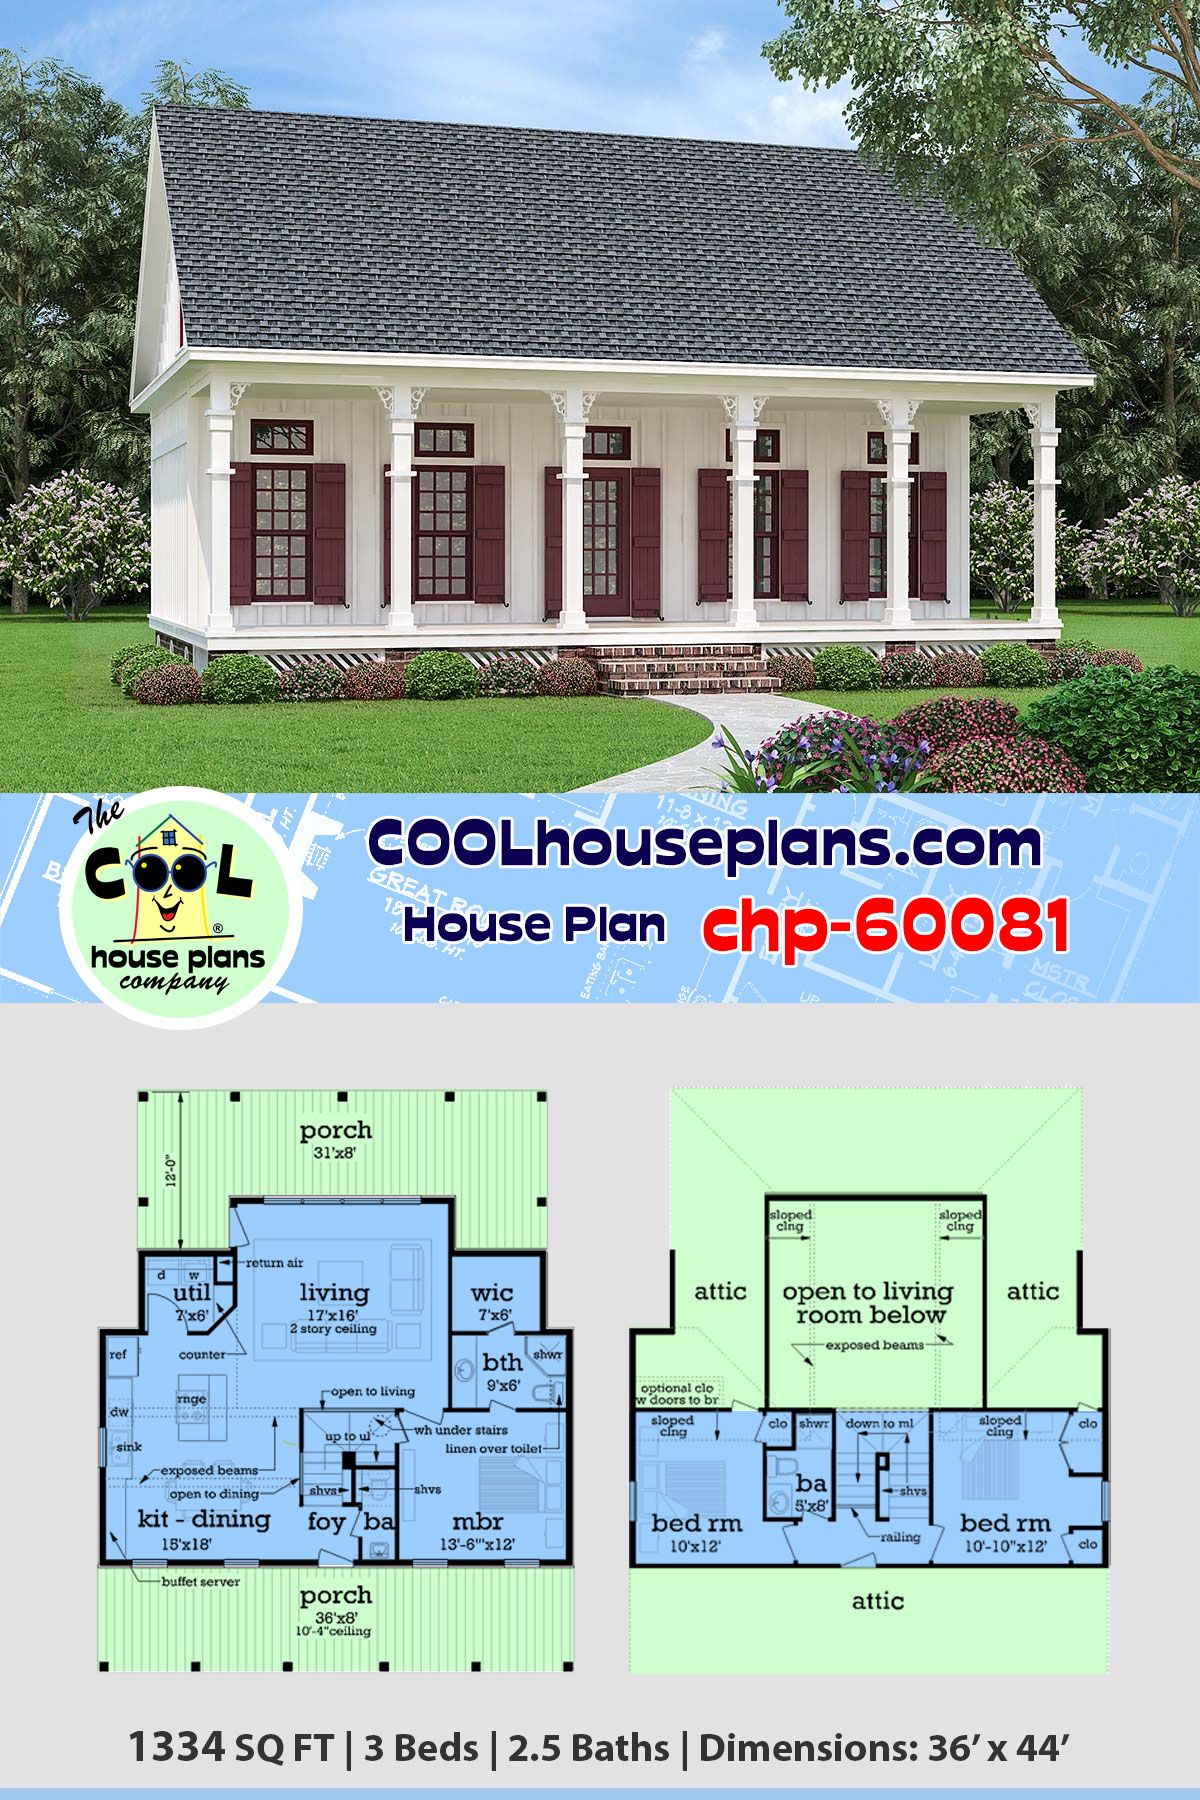 House Plan chp60081 Colonial house plans, House plans